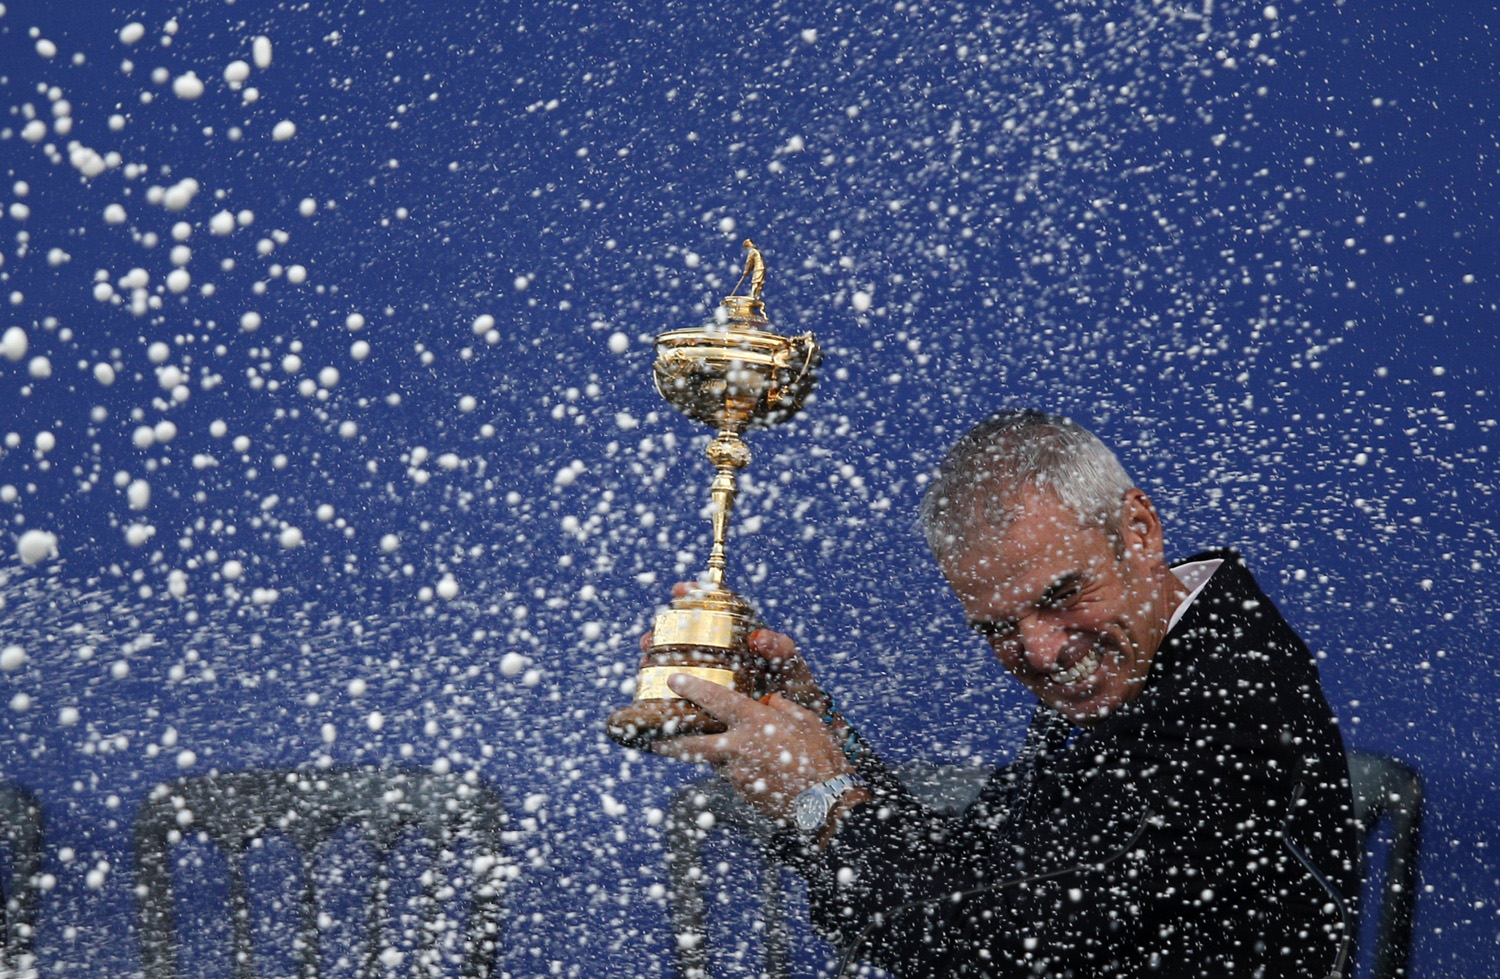 Captain of Team Europe Paul McGinley of Ireland is sprayed with champagne as he holds the Ryder Cup trophy on the final day of the Ryder Cup golf tournament at the Gleneagles Hotel in Gleneagles, Scotland, on Sept. 28, 2014.